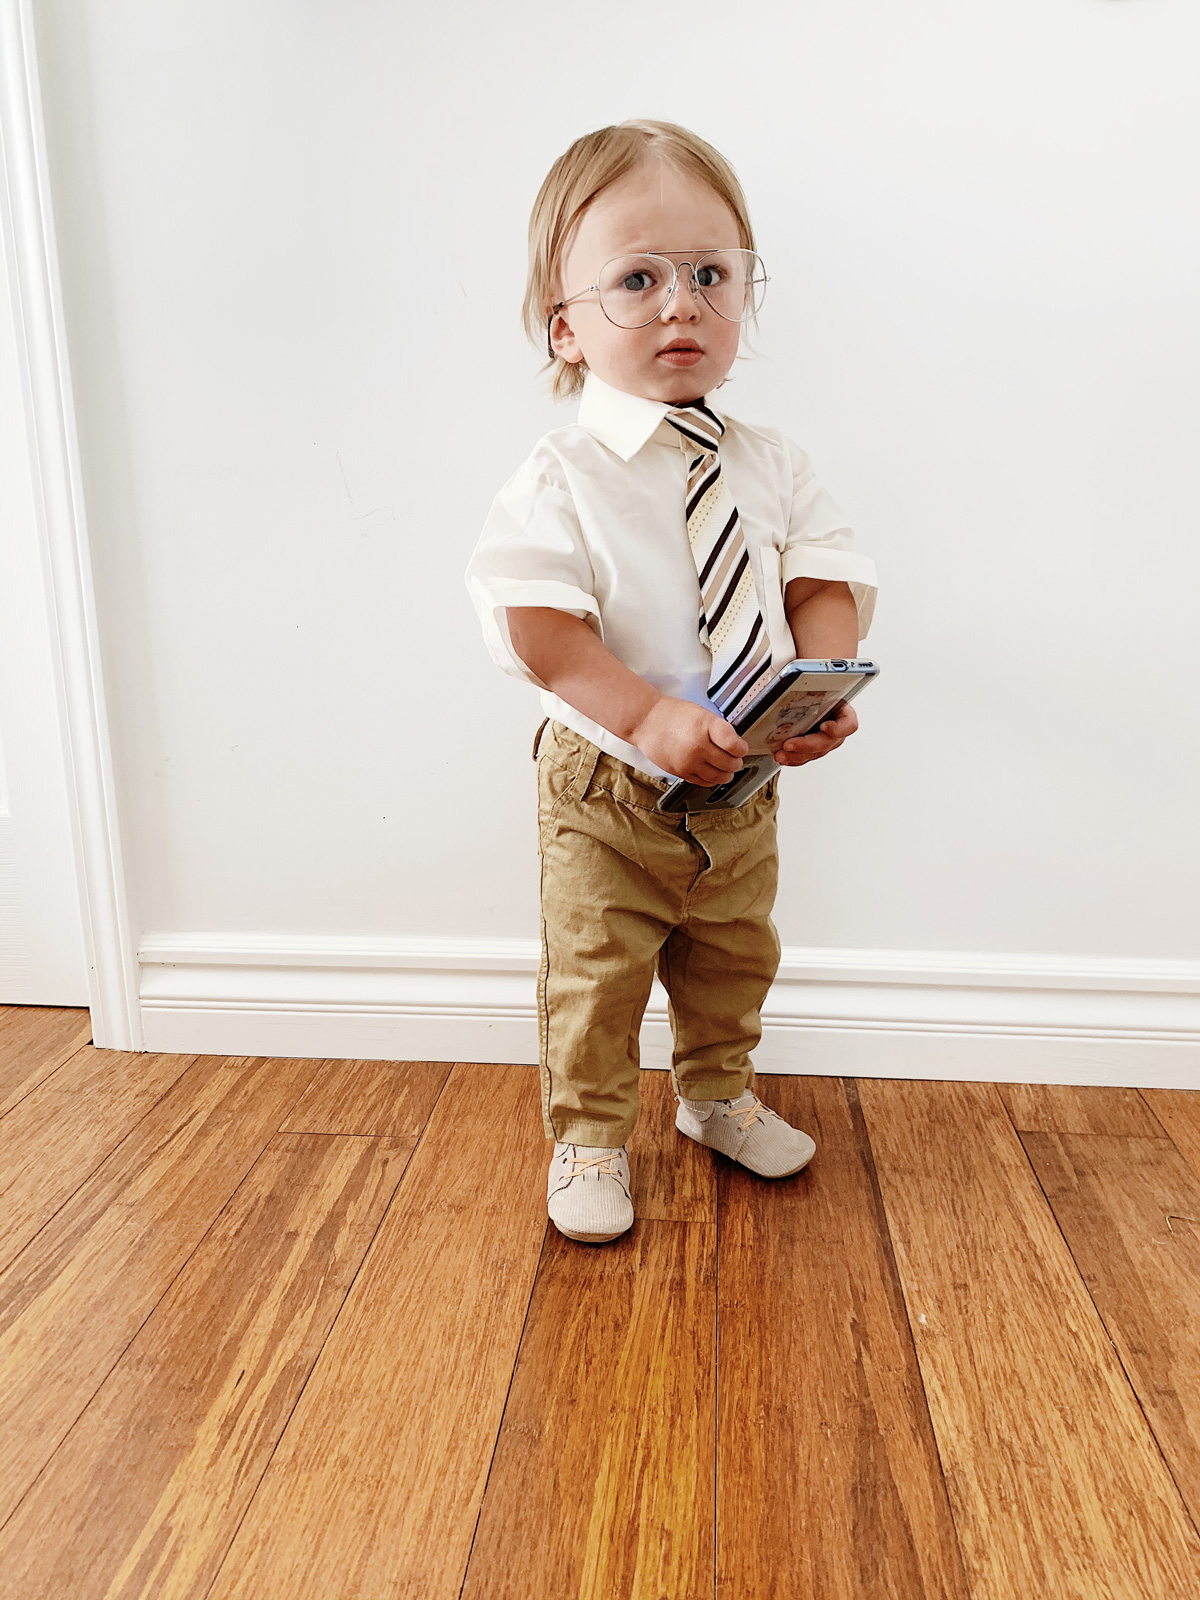 DIY Kids Halloween 2019 / Dwight Schrute from The Office 